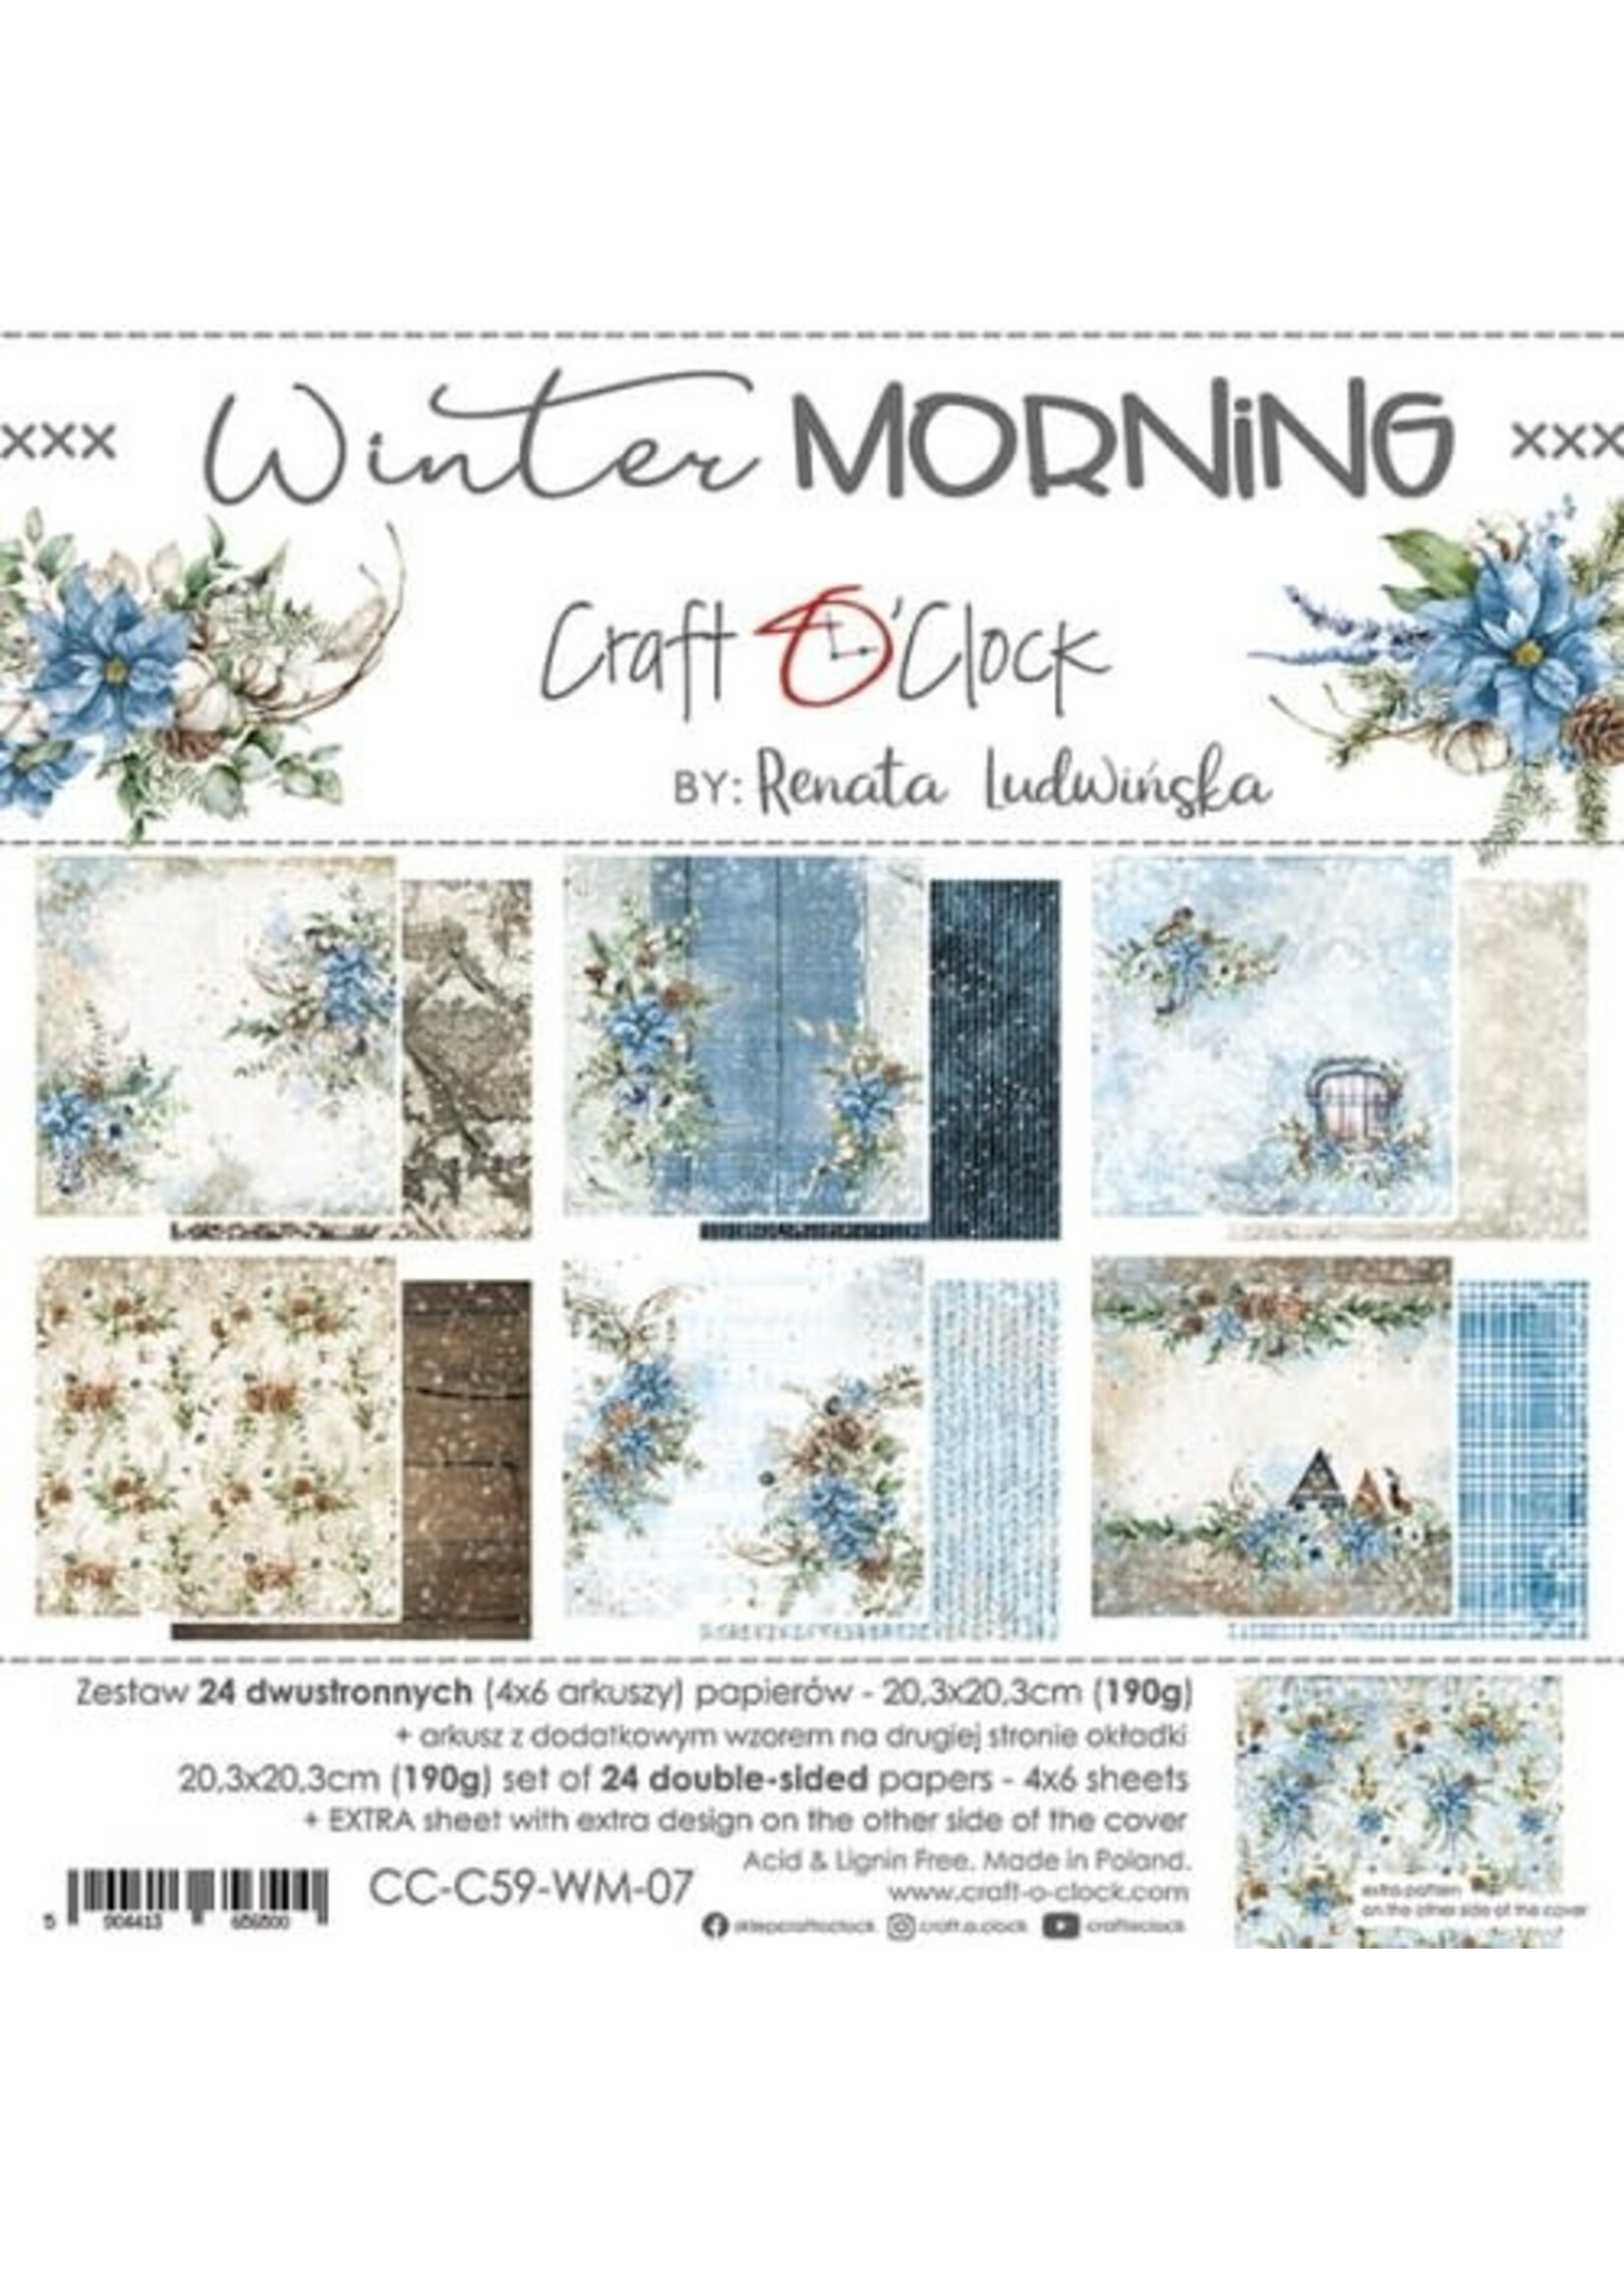 Craft O Clock WINTER MORNING - A SET OF PAPERS 20,3X20,3CM